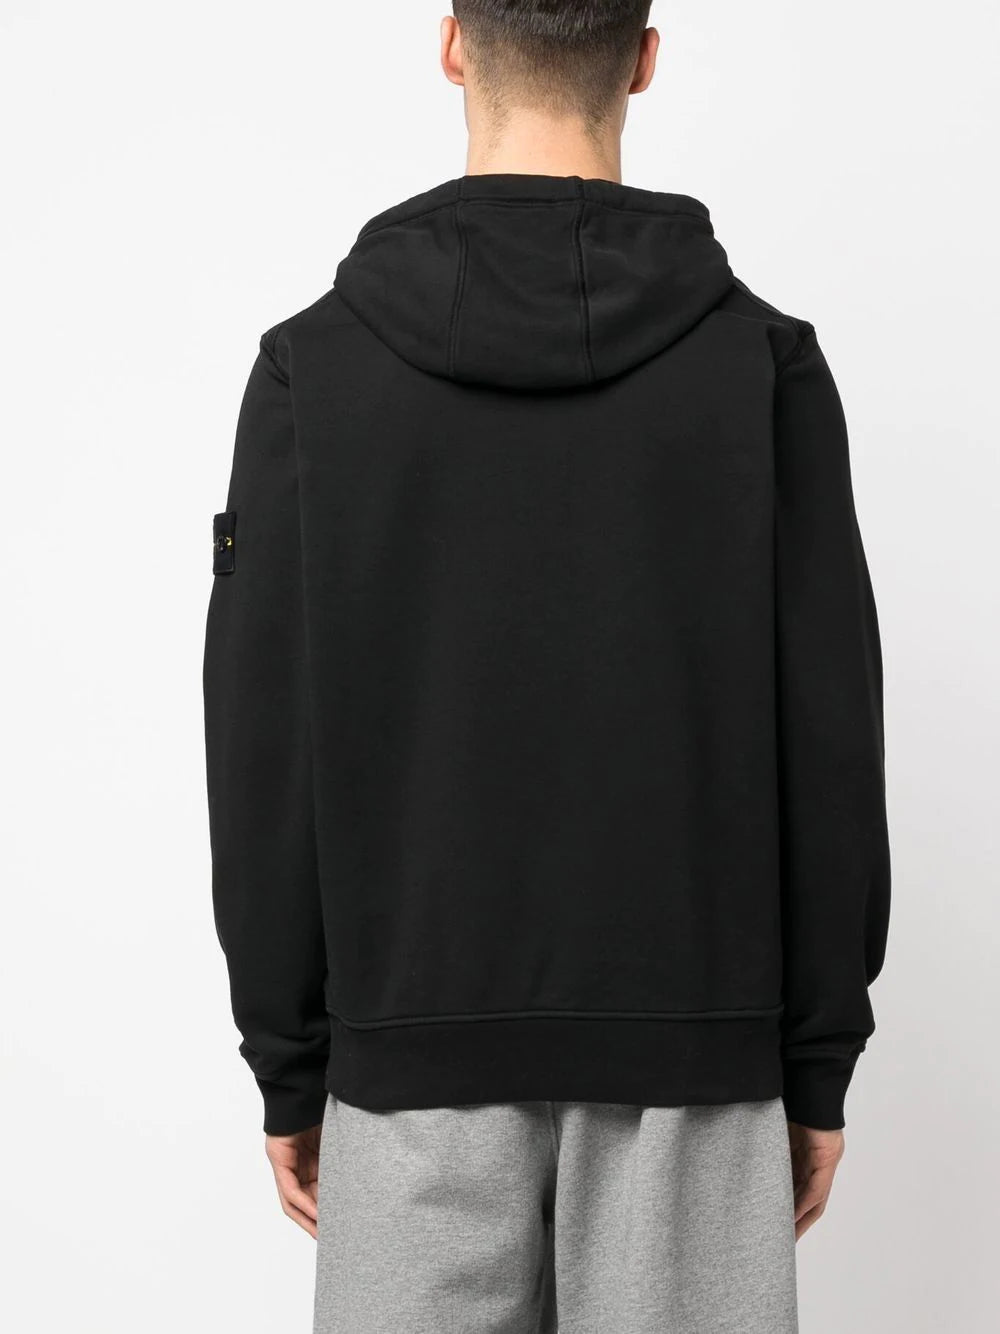 Stone Island Compass Patch Drawstring Hoodie in Black